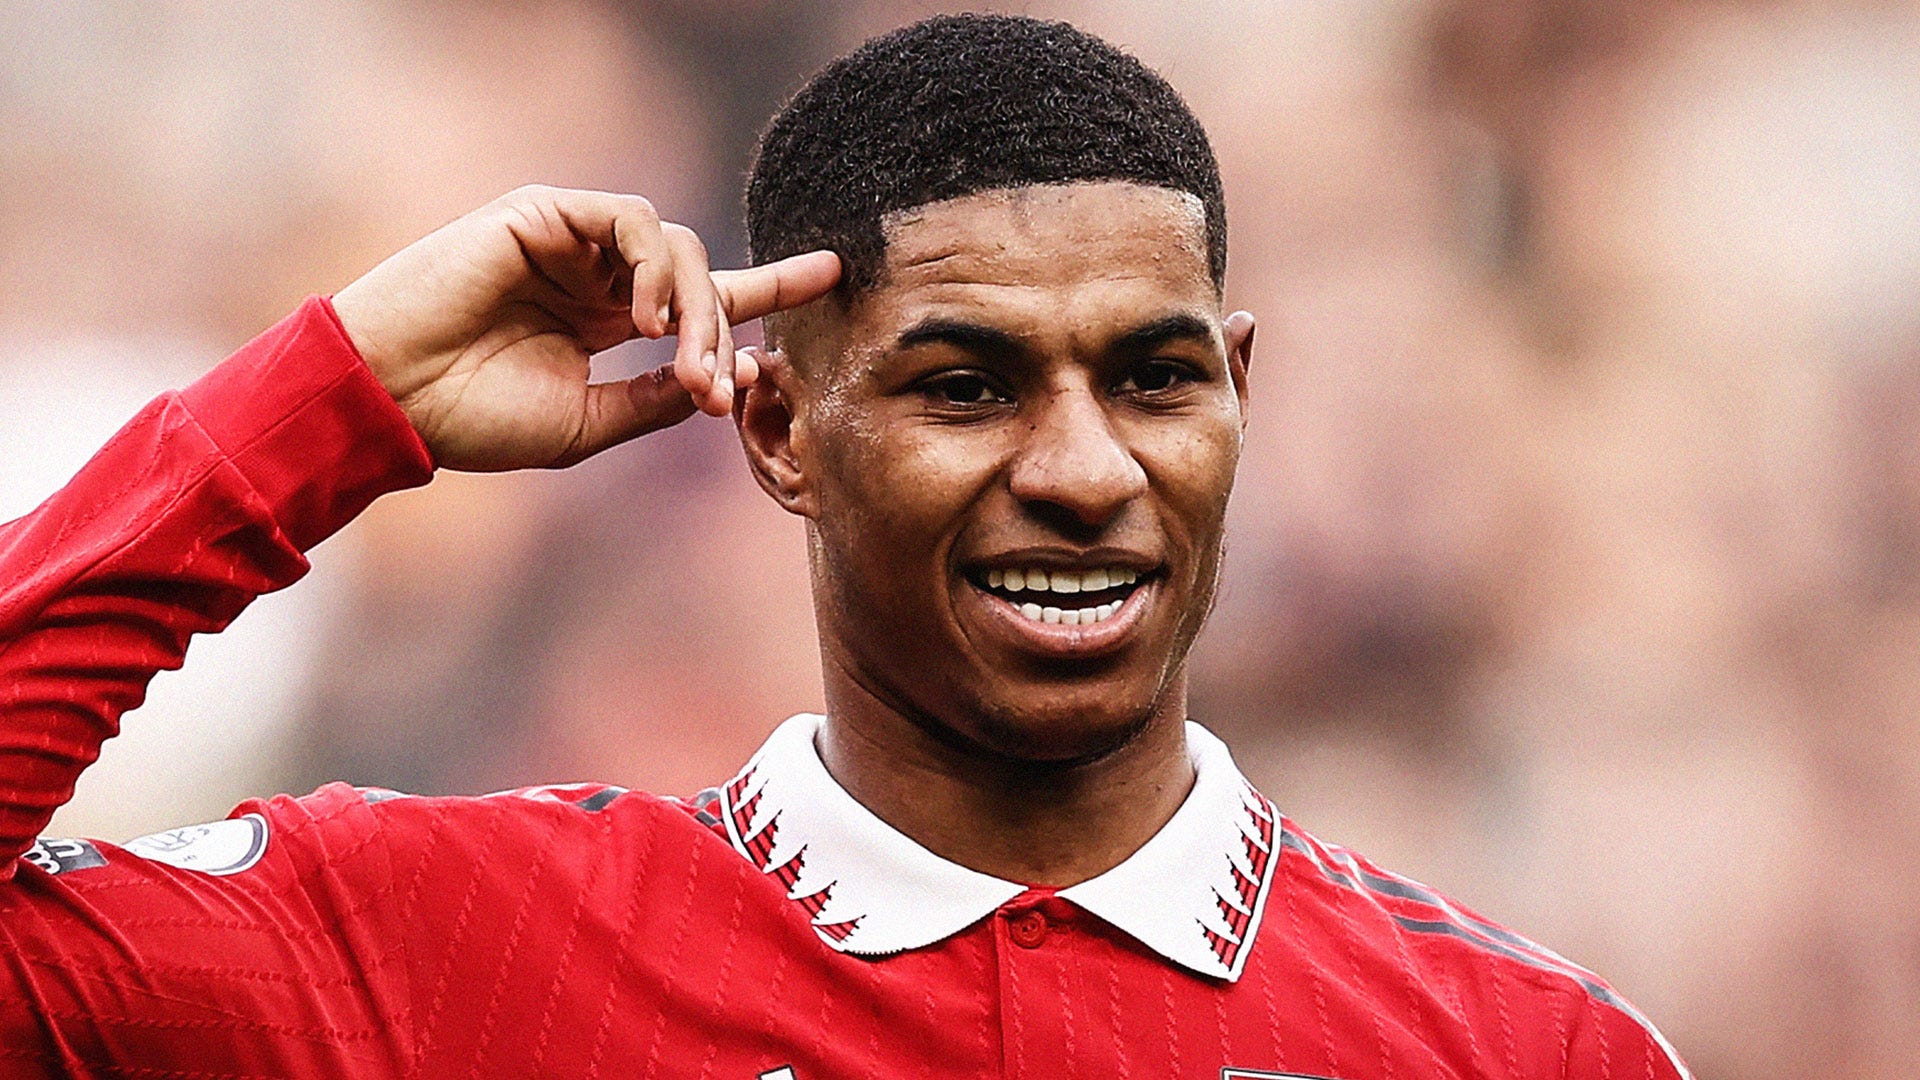 Marcus Rashford was offered £400,000-a-week deal by PSG as Man Utd take ‘no major steps forward’ in contract talks